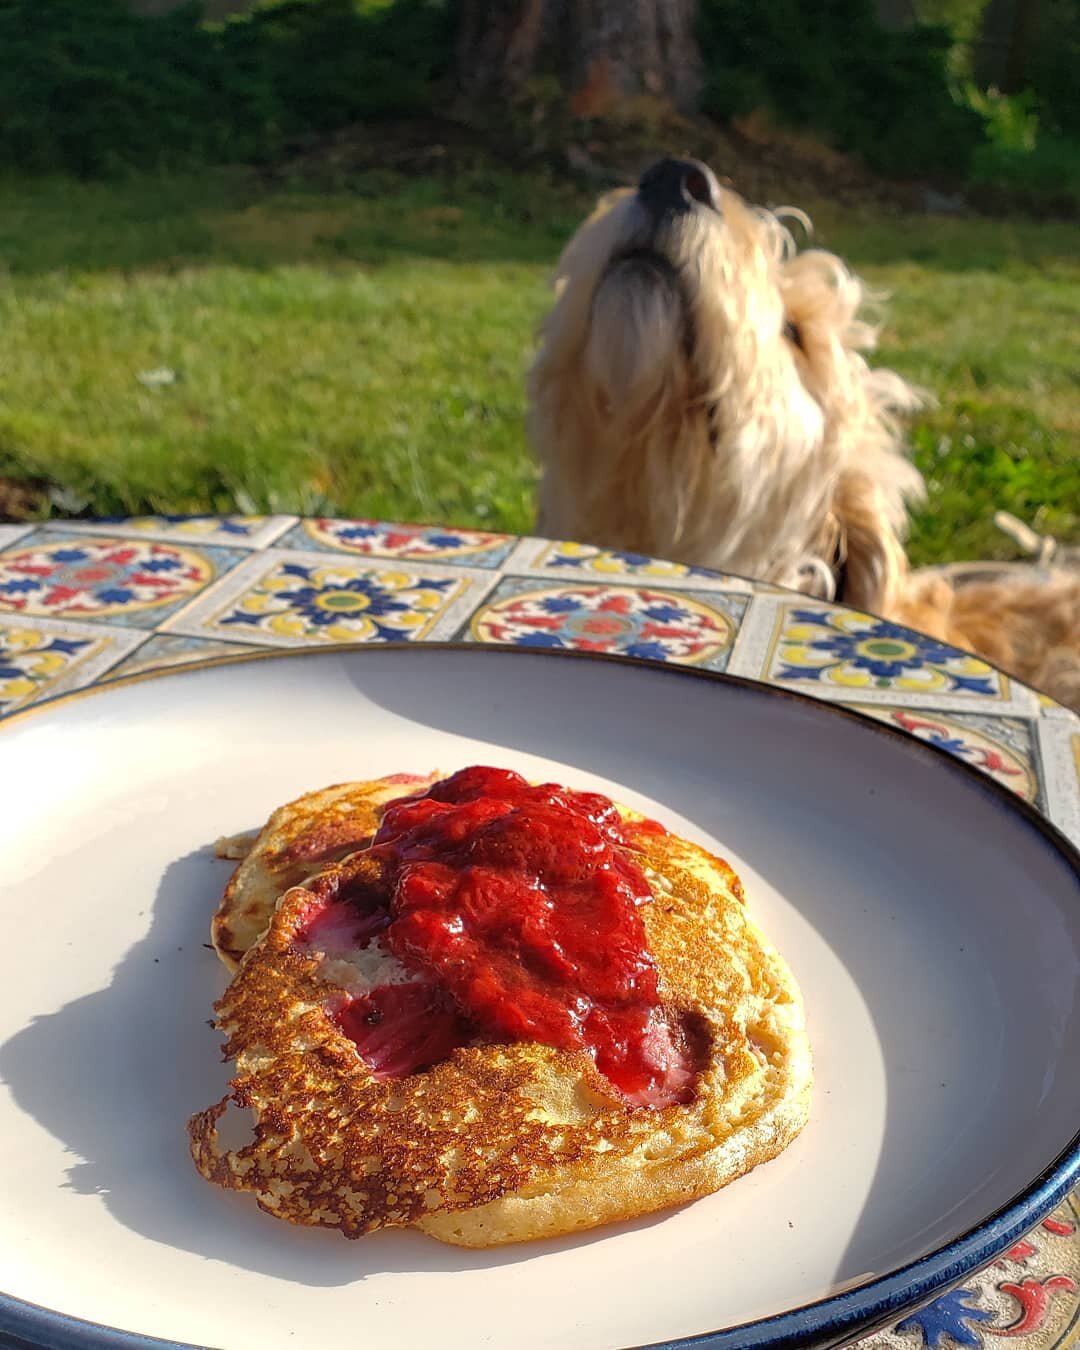 Savoring every single second of Hood Strawberry season. 🍓

Over the weekend our Market Manager made Hood Strawberry Pancakes 🥞 topped with Hood Stawberry compote (you can never have too many Hoods).

What delicious homemade meals did you make with 